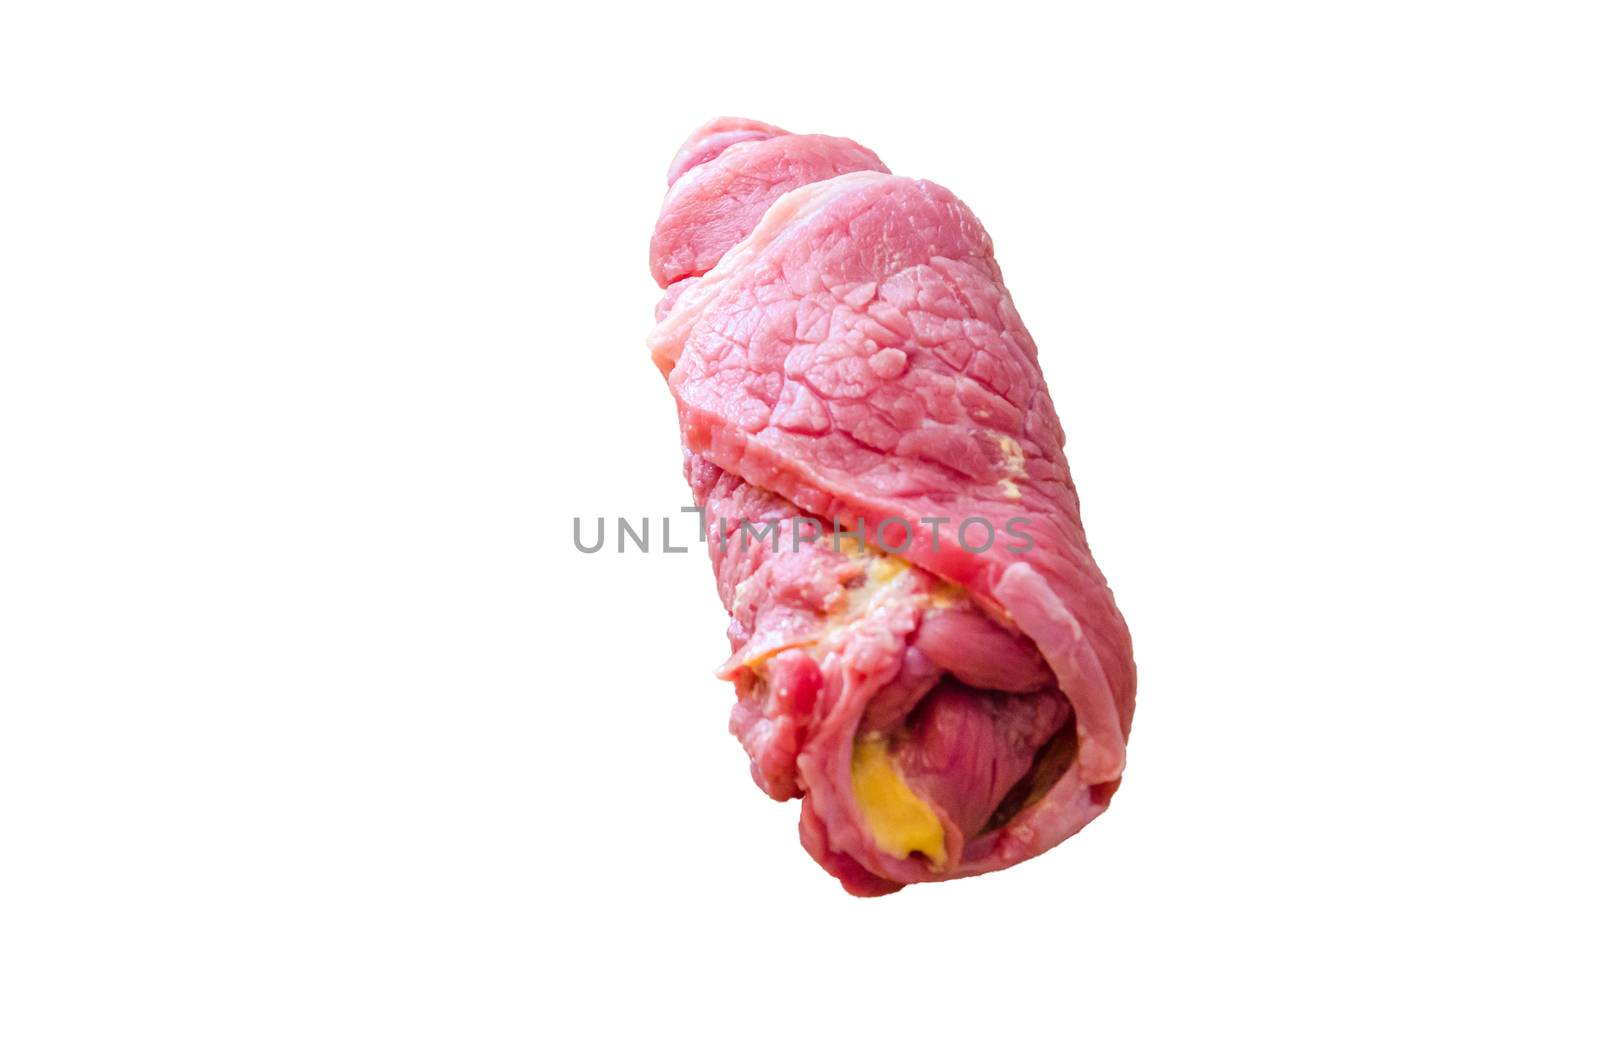 Non-fried roulade of fresh beef in front of white background